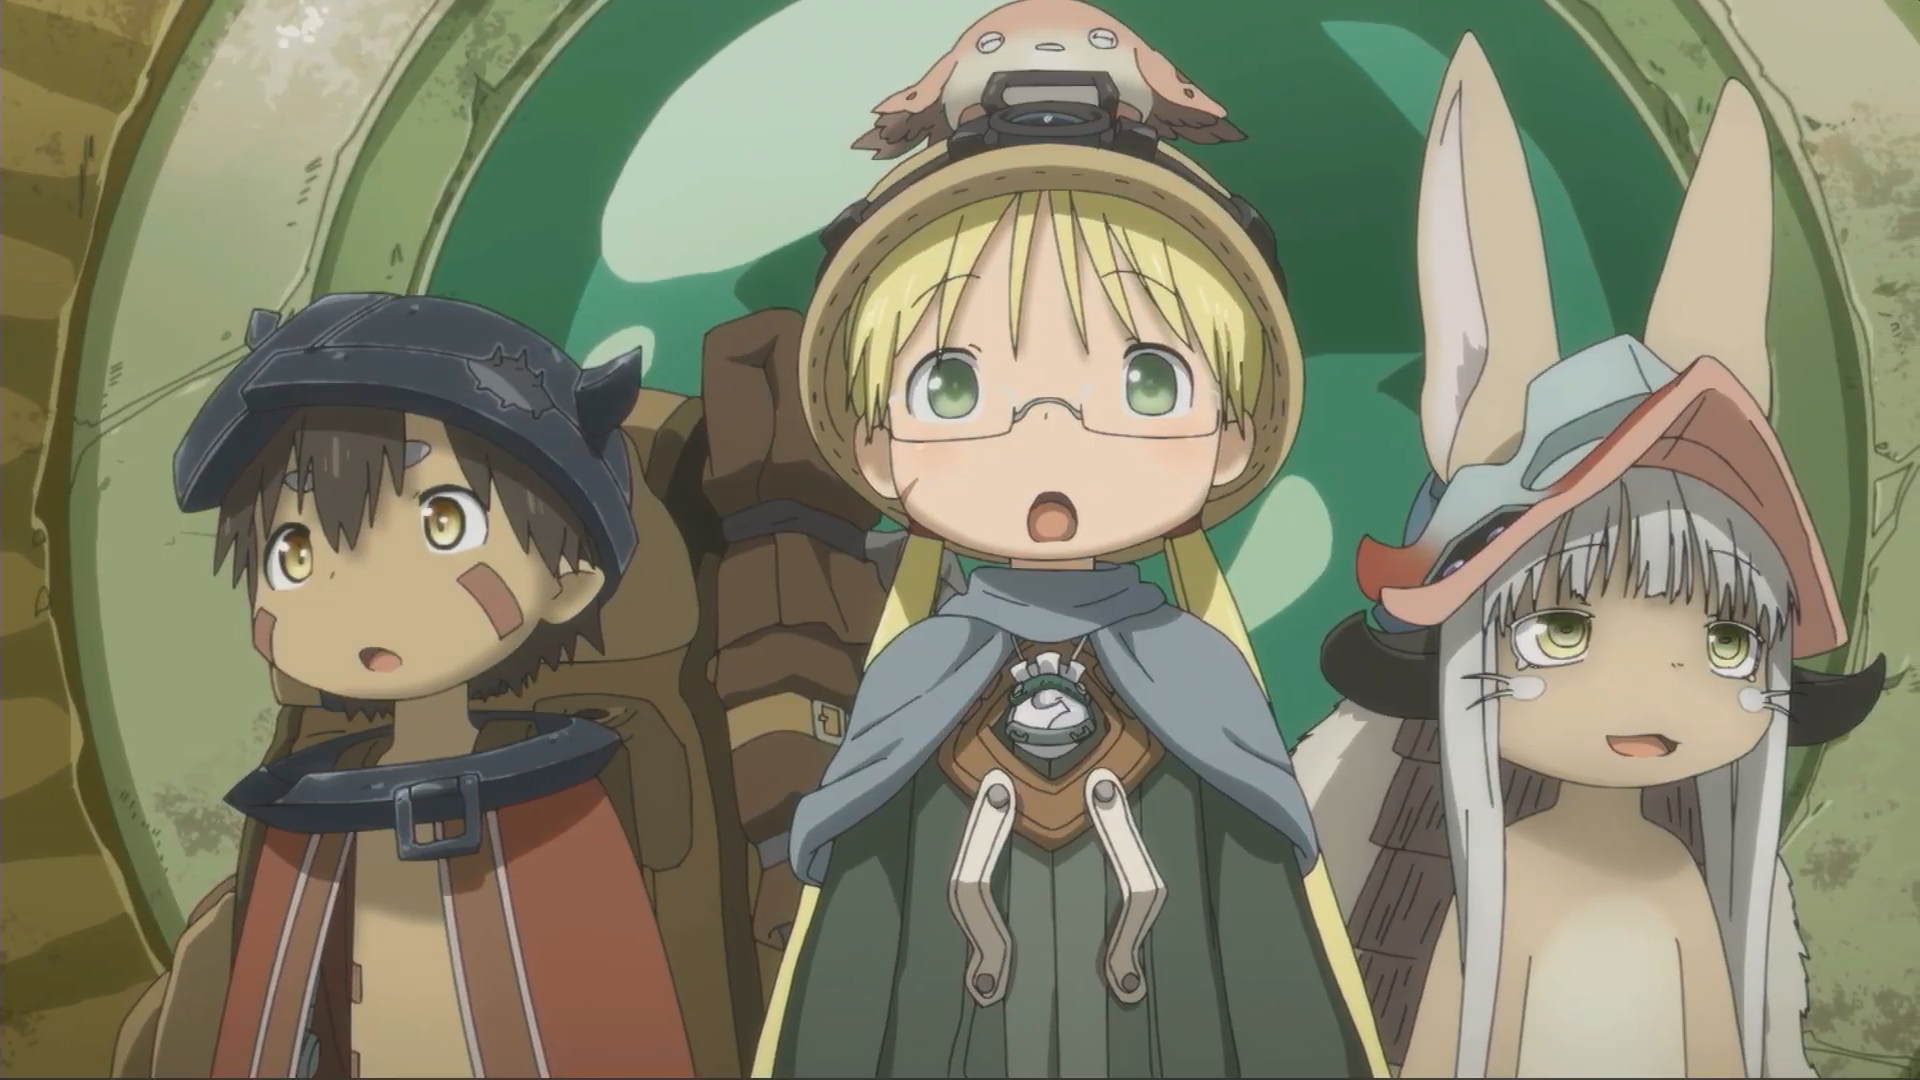 Made in Abyss Season 2 Reveals Trailer and New Visual - Anime Corner